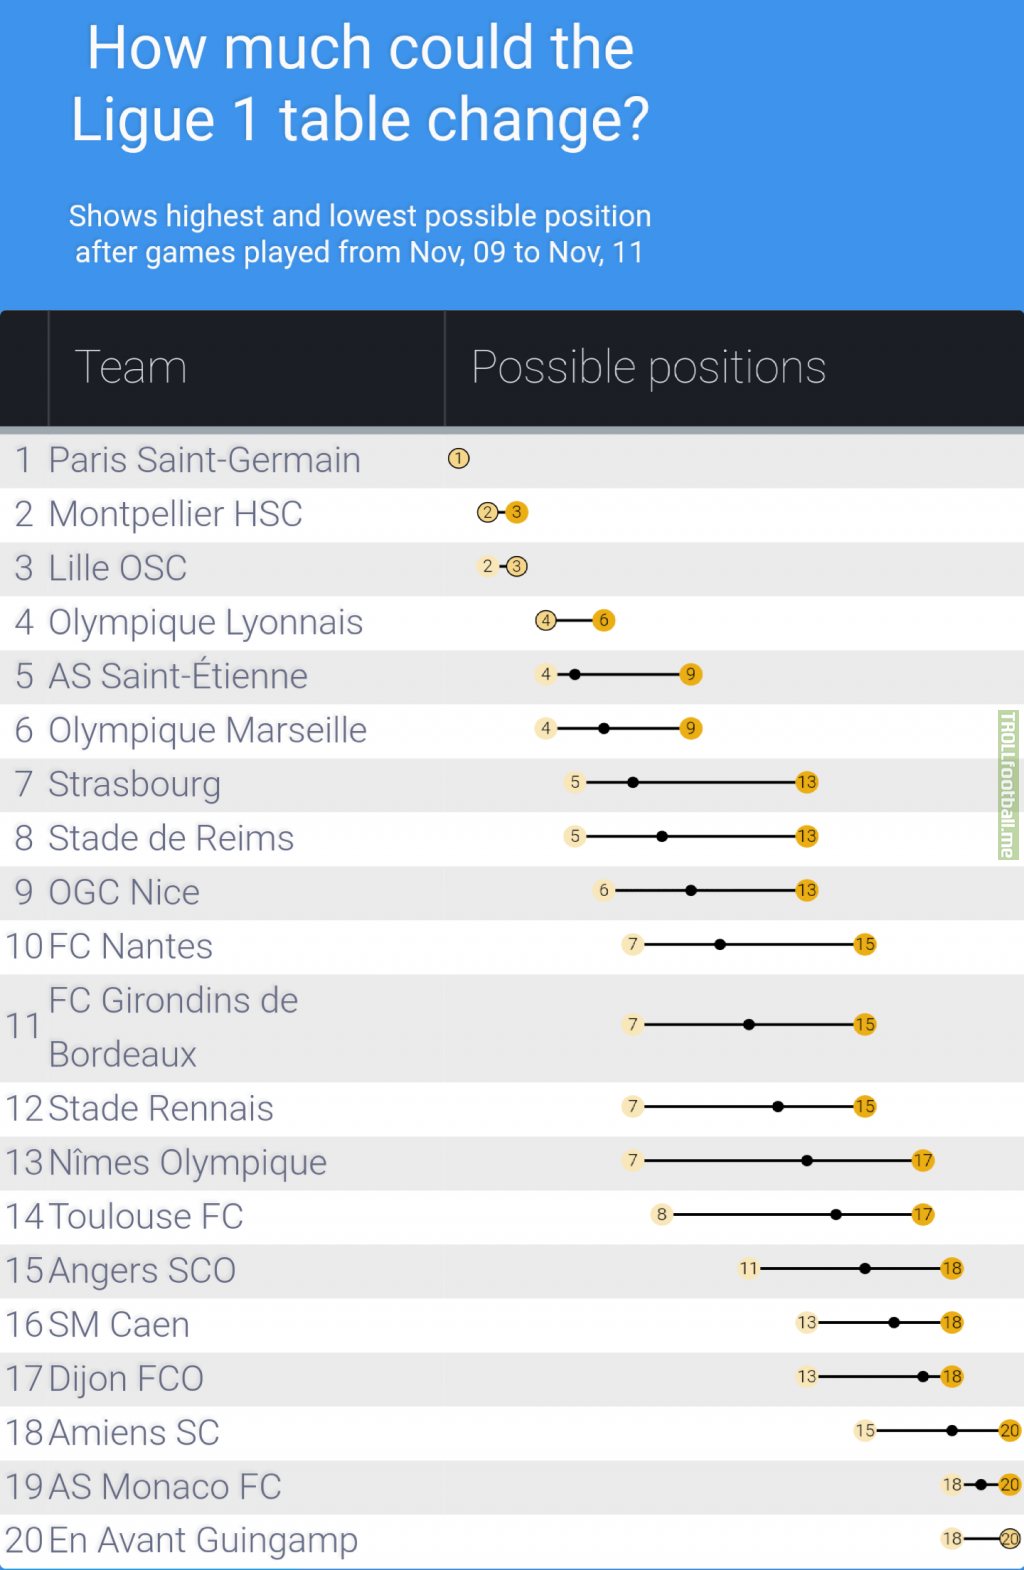 How much could the Ligue 1 table change